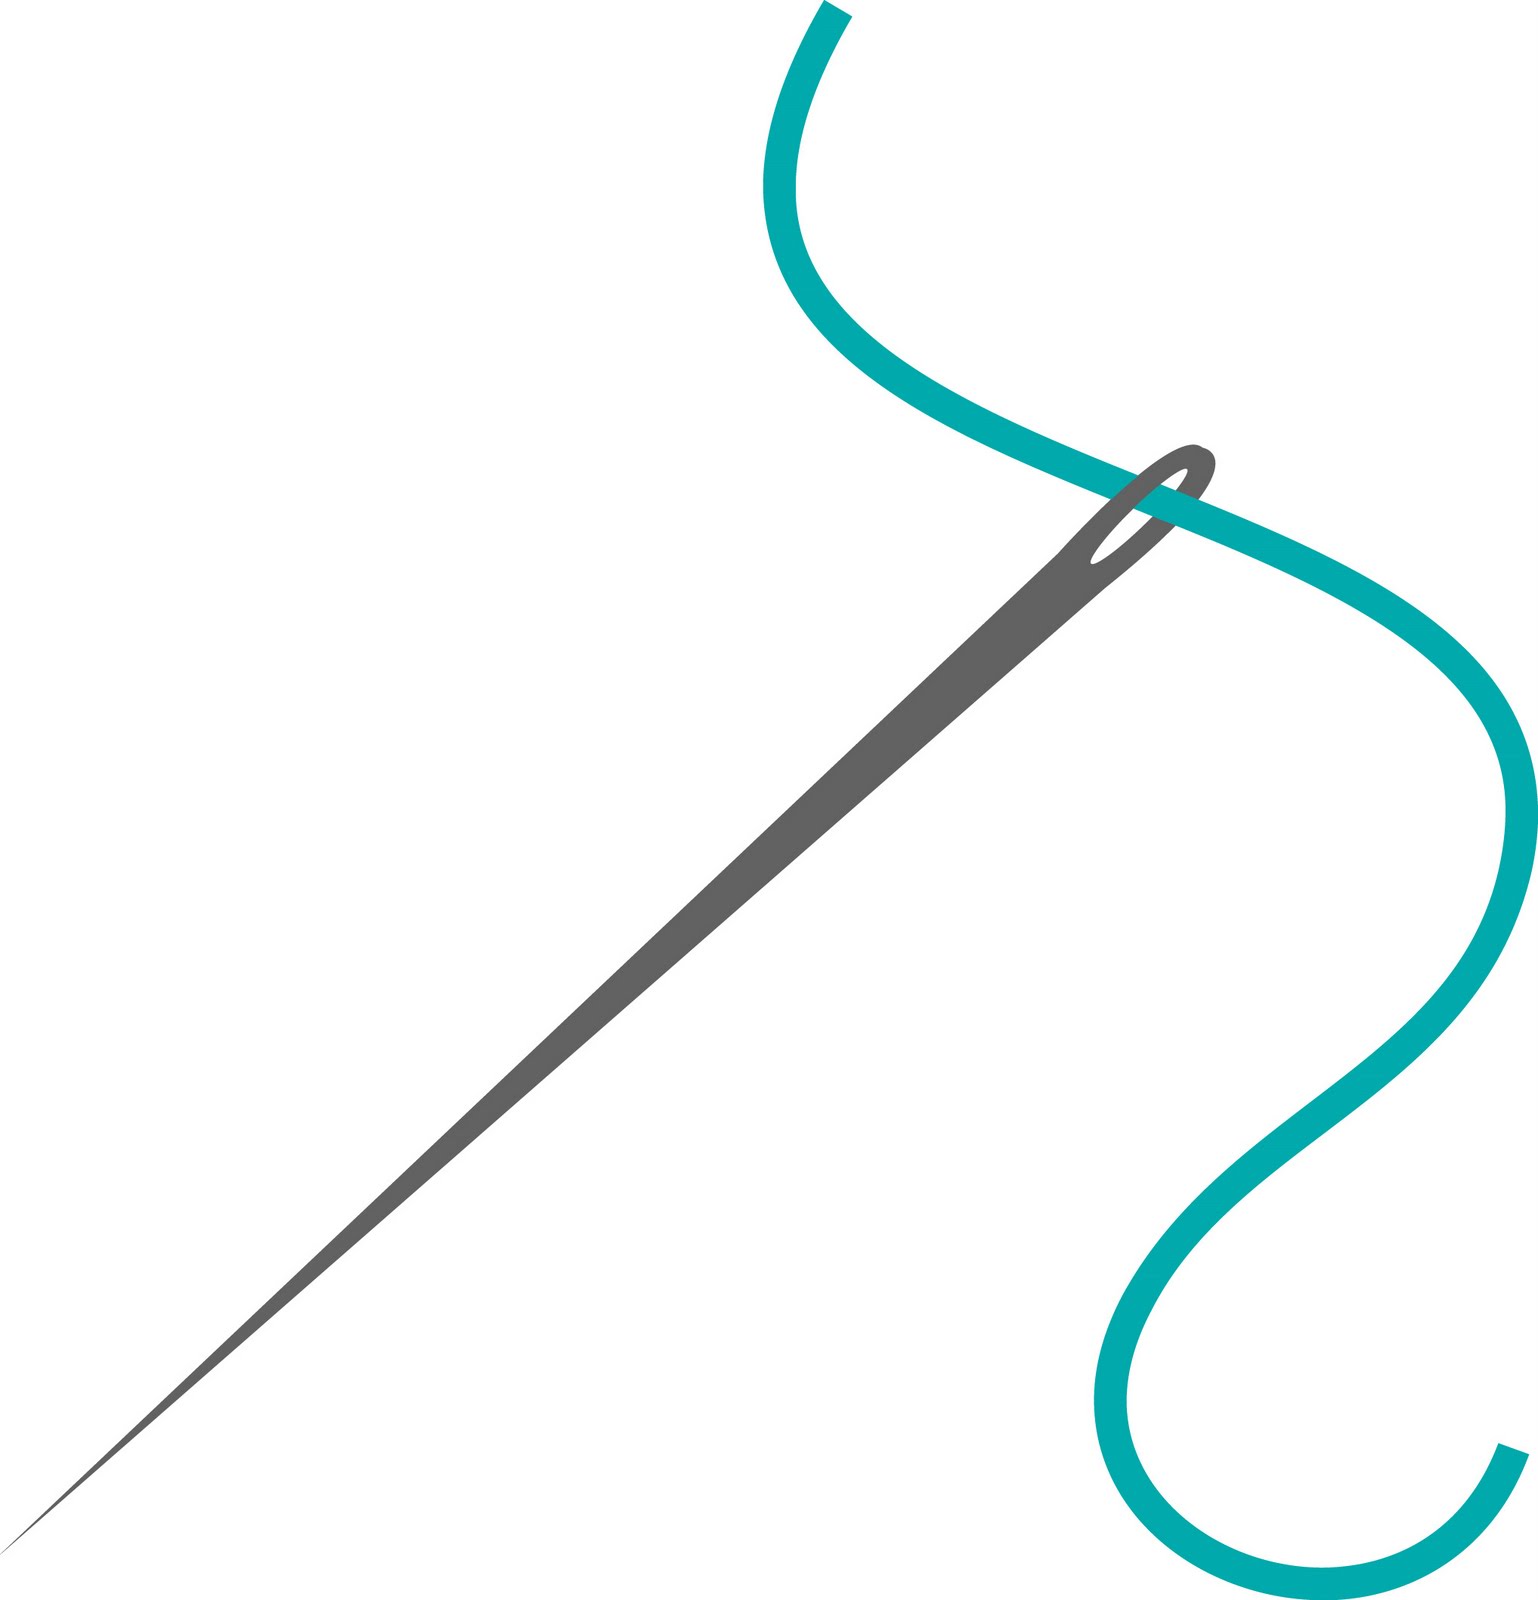 Needle Iconneedle With Threadsewing Needle Needle For Sewing Stock  Illustration - Download Image Now - iStock